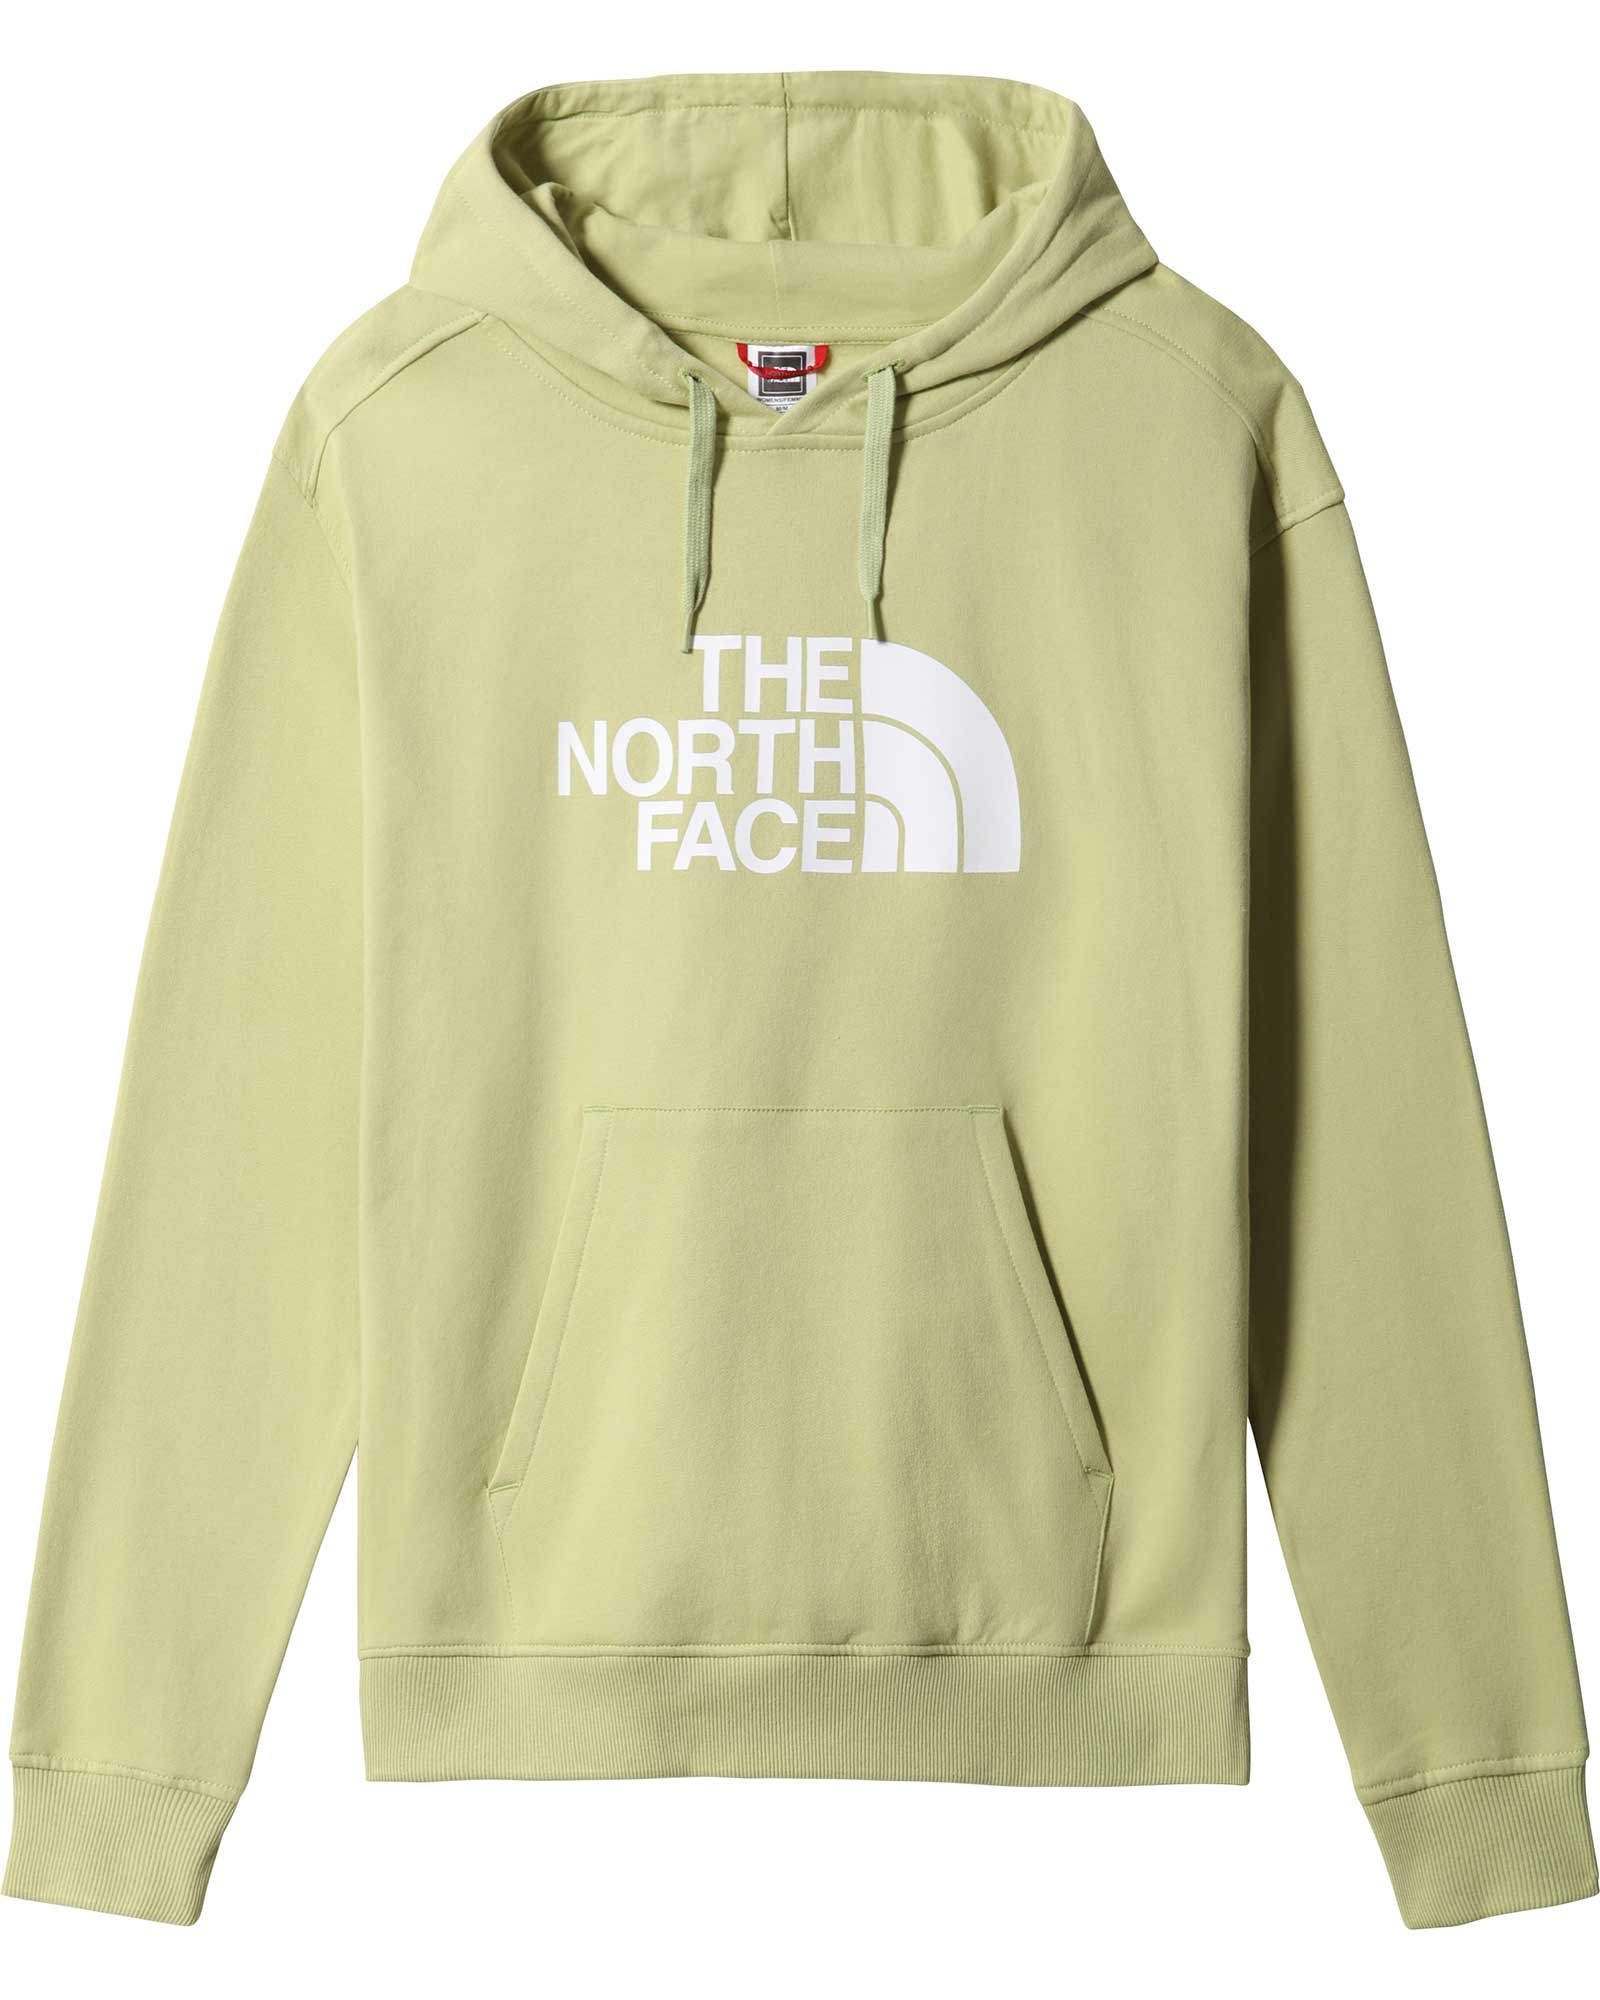 The North Face Light Drew Peak Women’s Hoodie - Weeping Willow XL